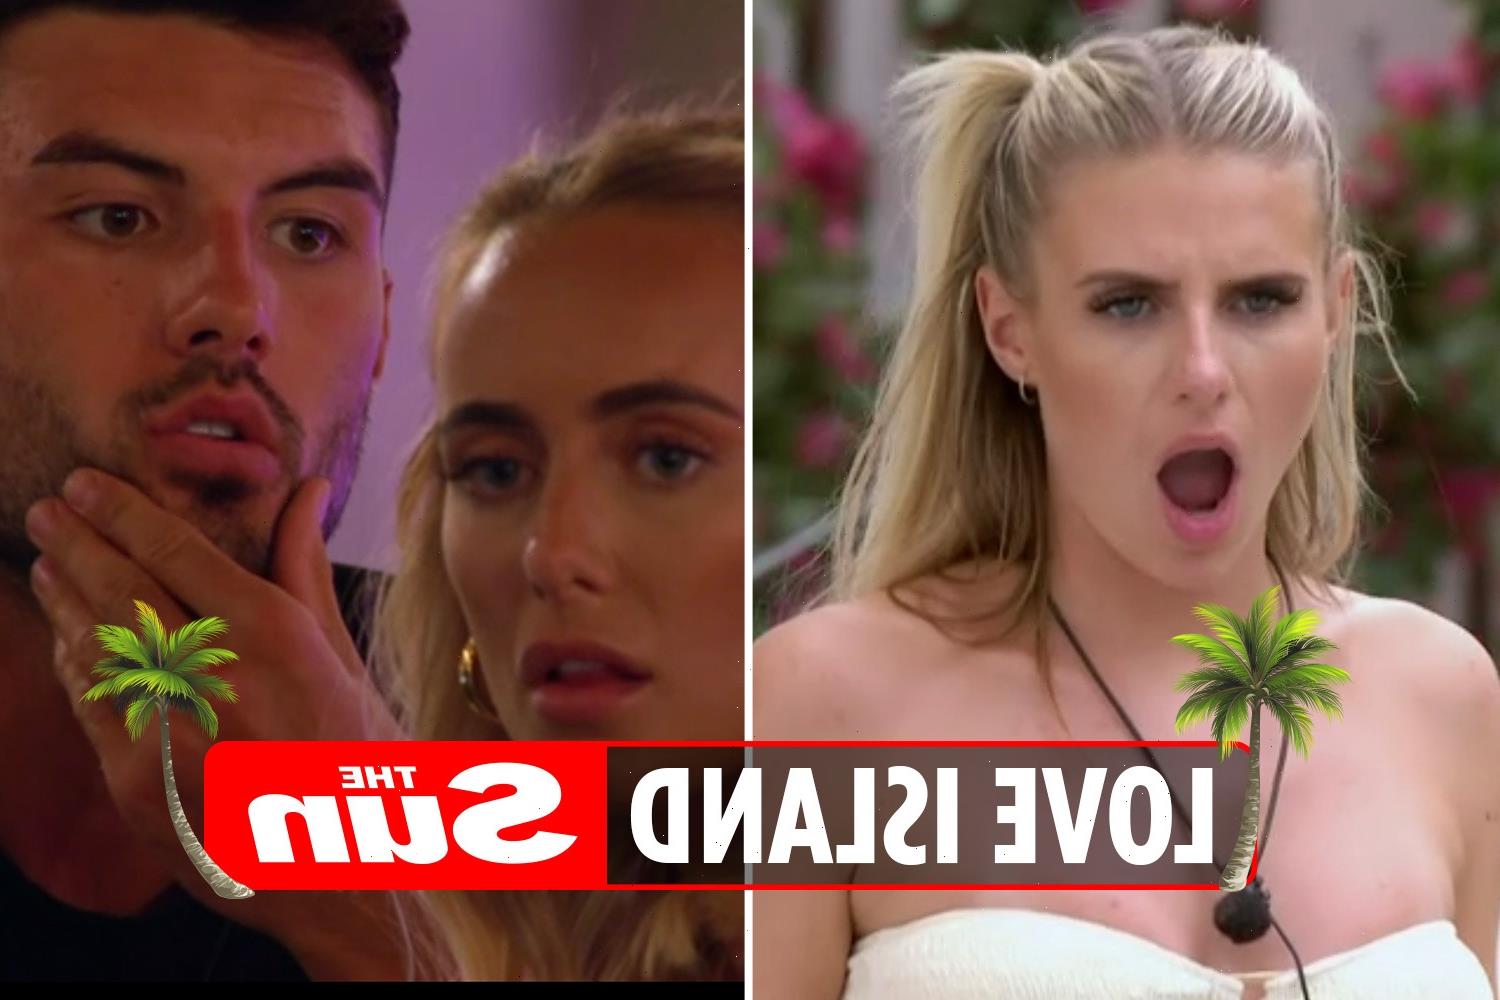 Love Island's explosive reunion show will return for 2021 ...